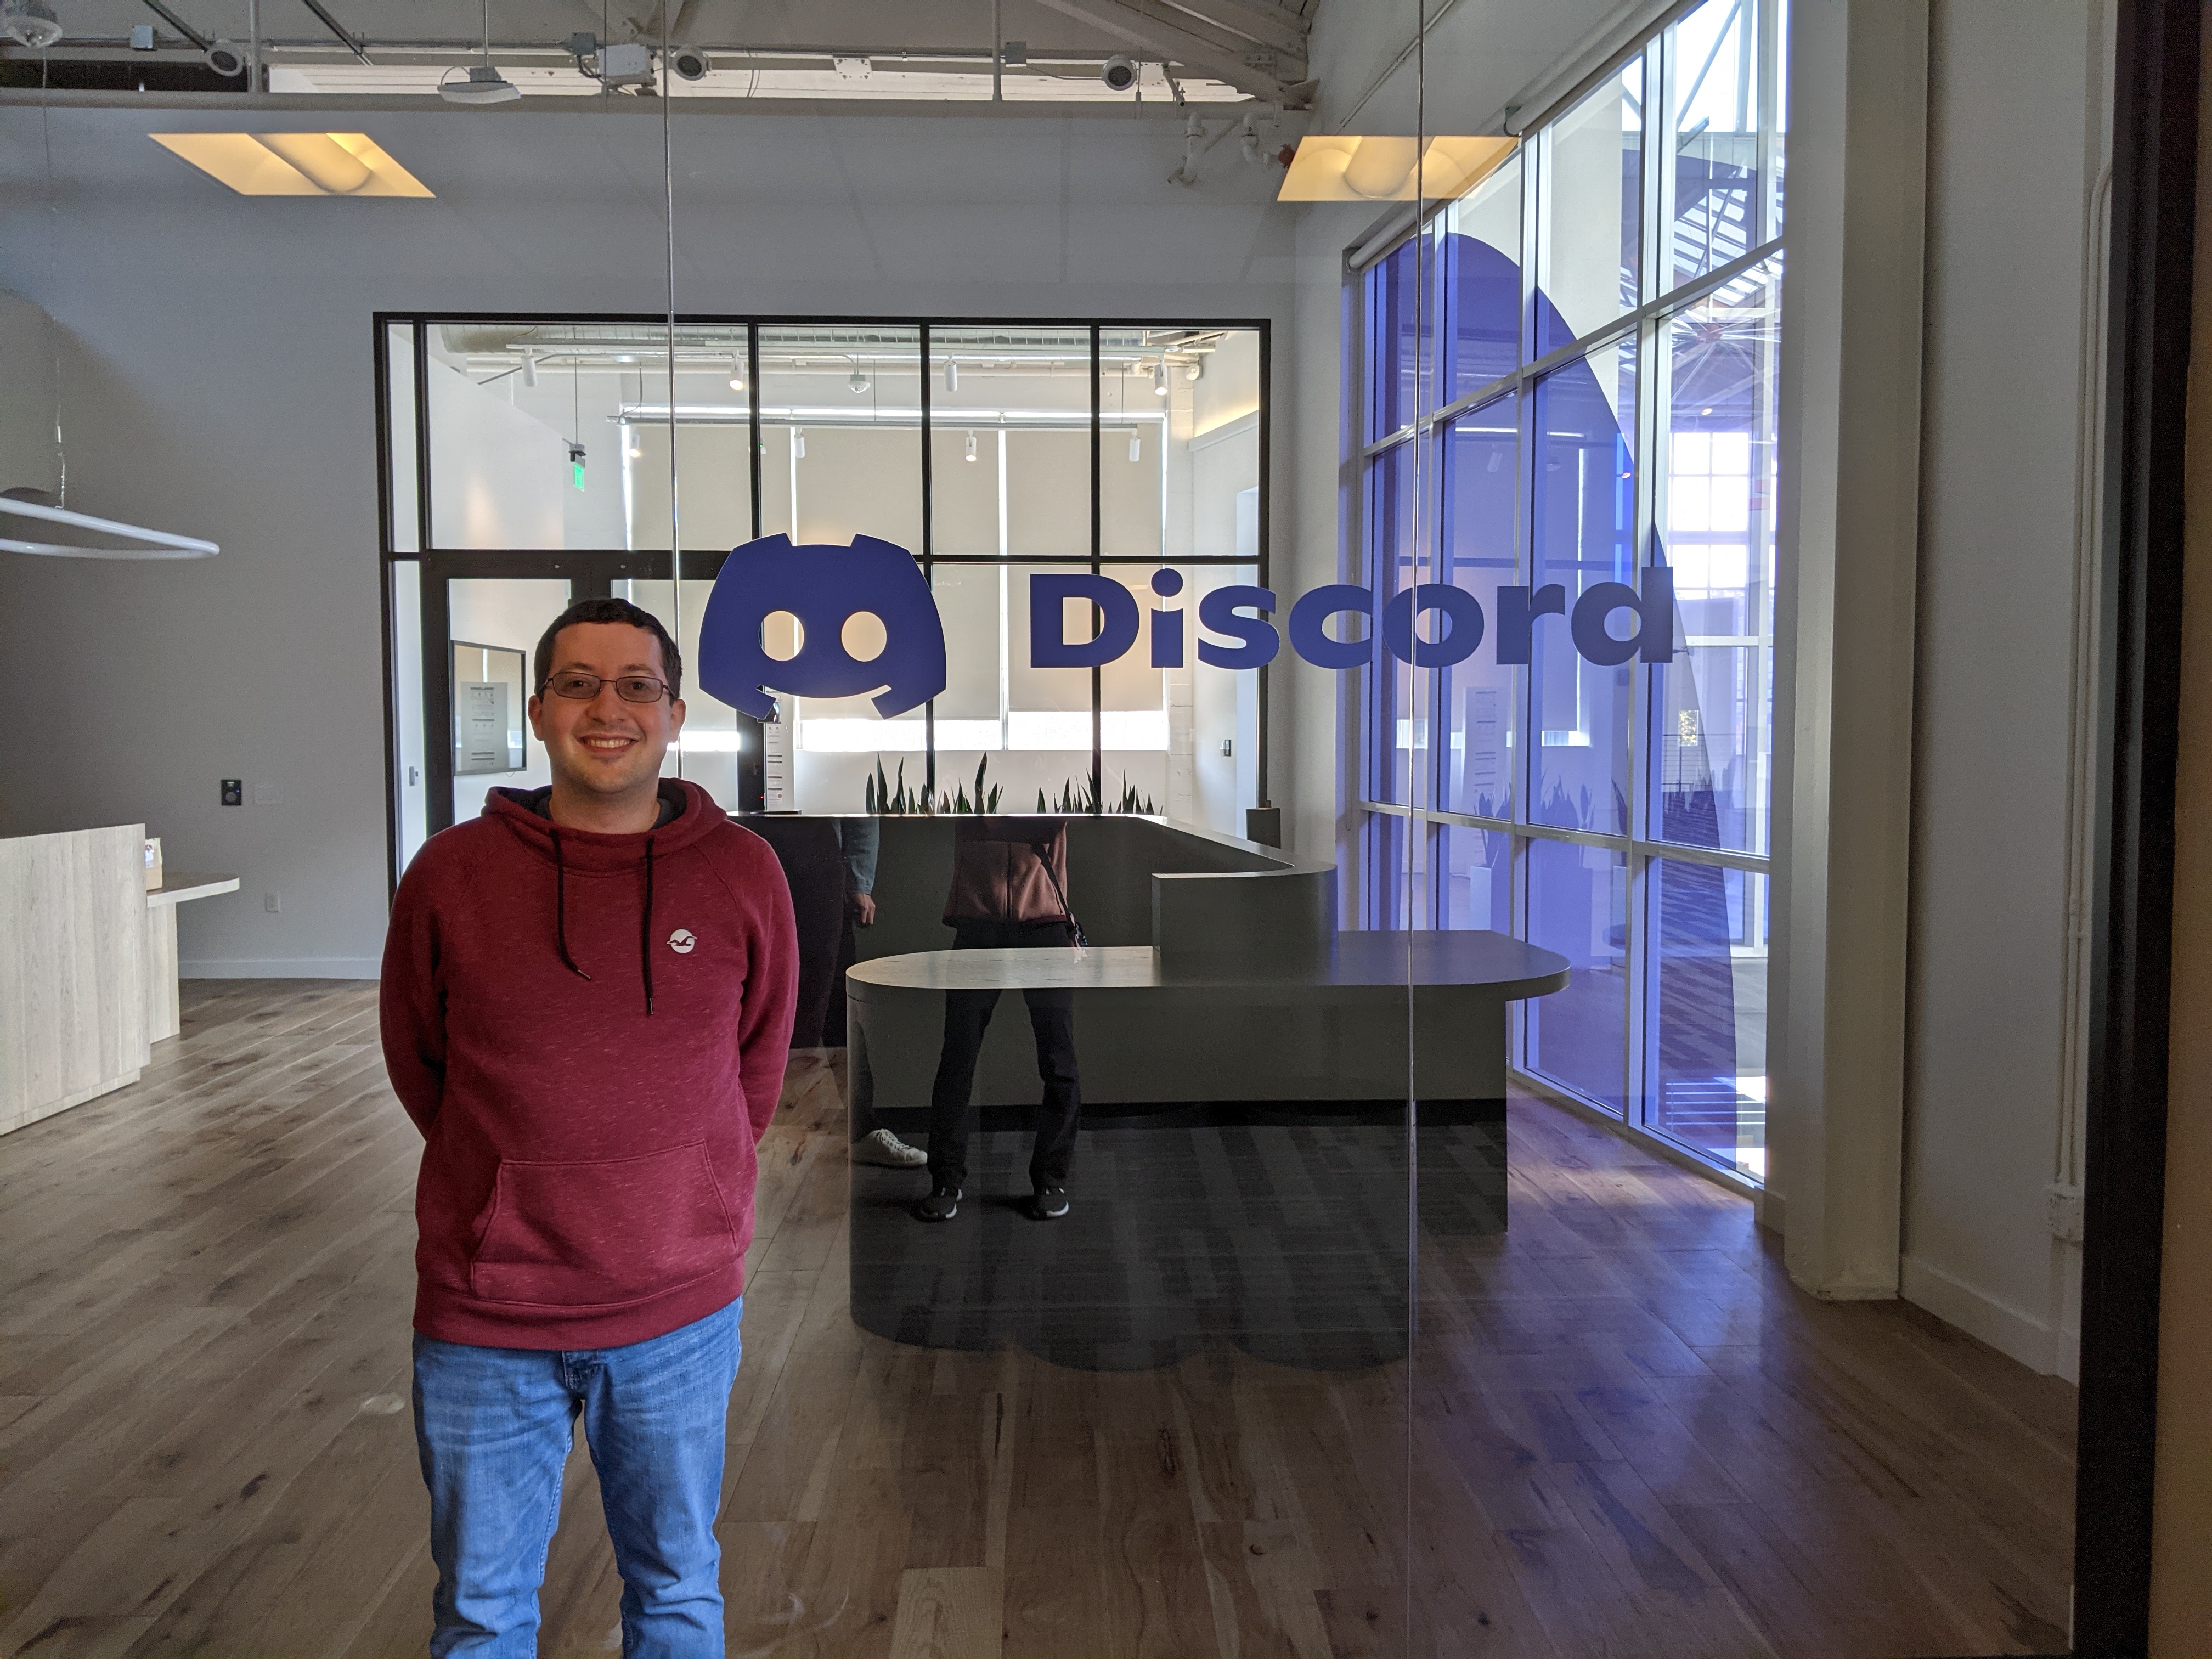 Ross, grinning, standing in front of a glass wall with the Discord logo. Behind the glass is an empty reception desk.